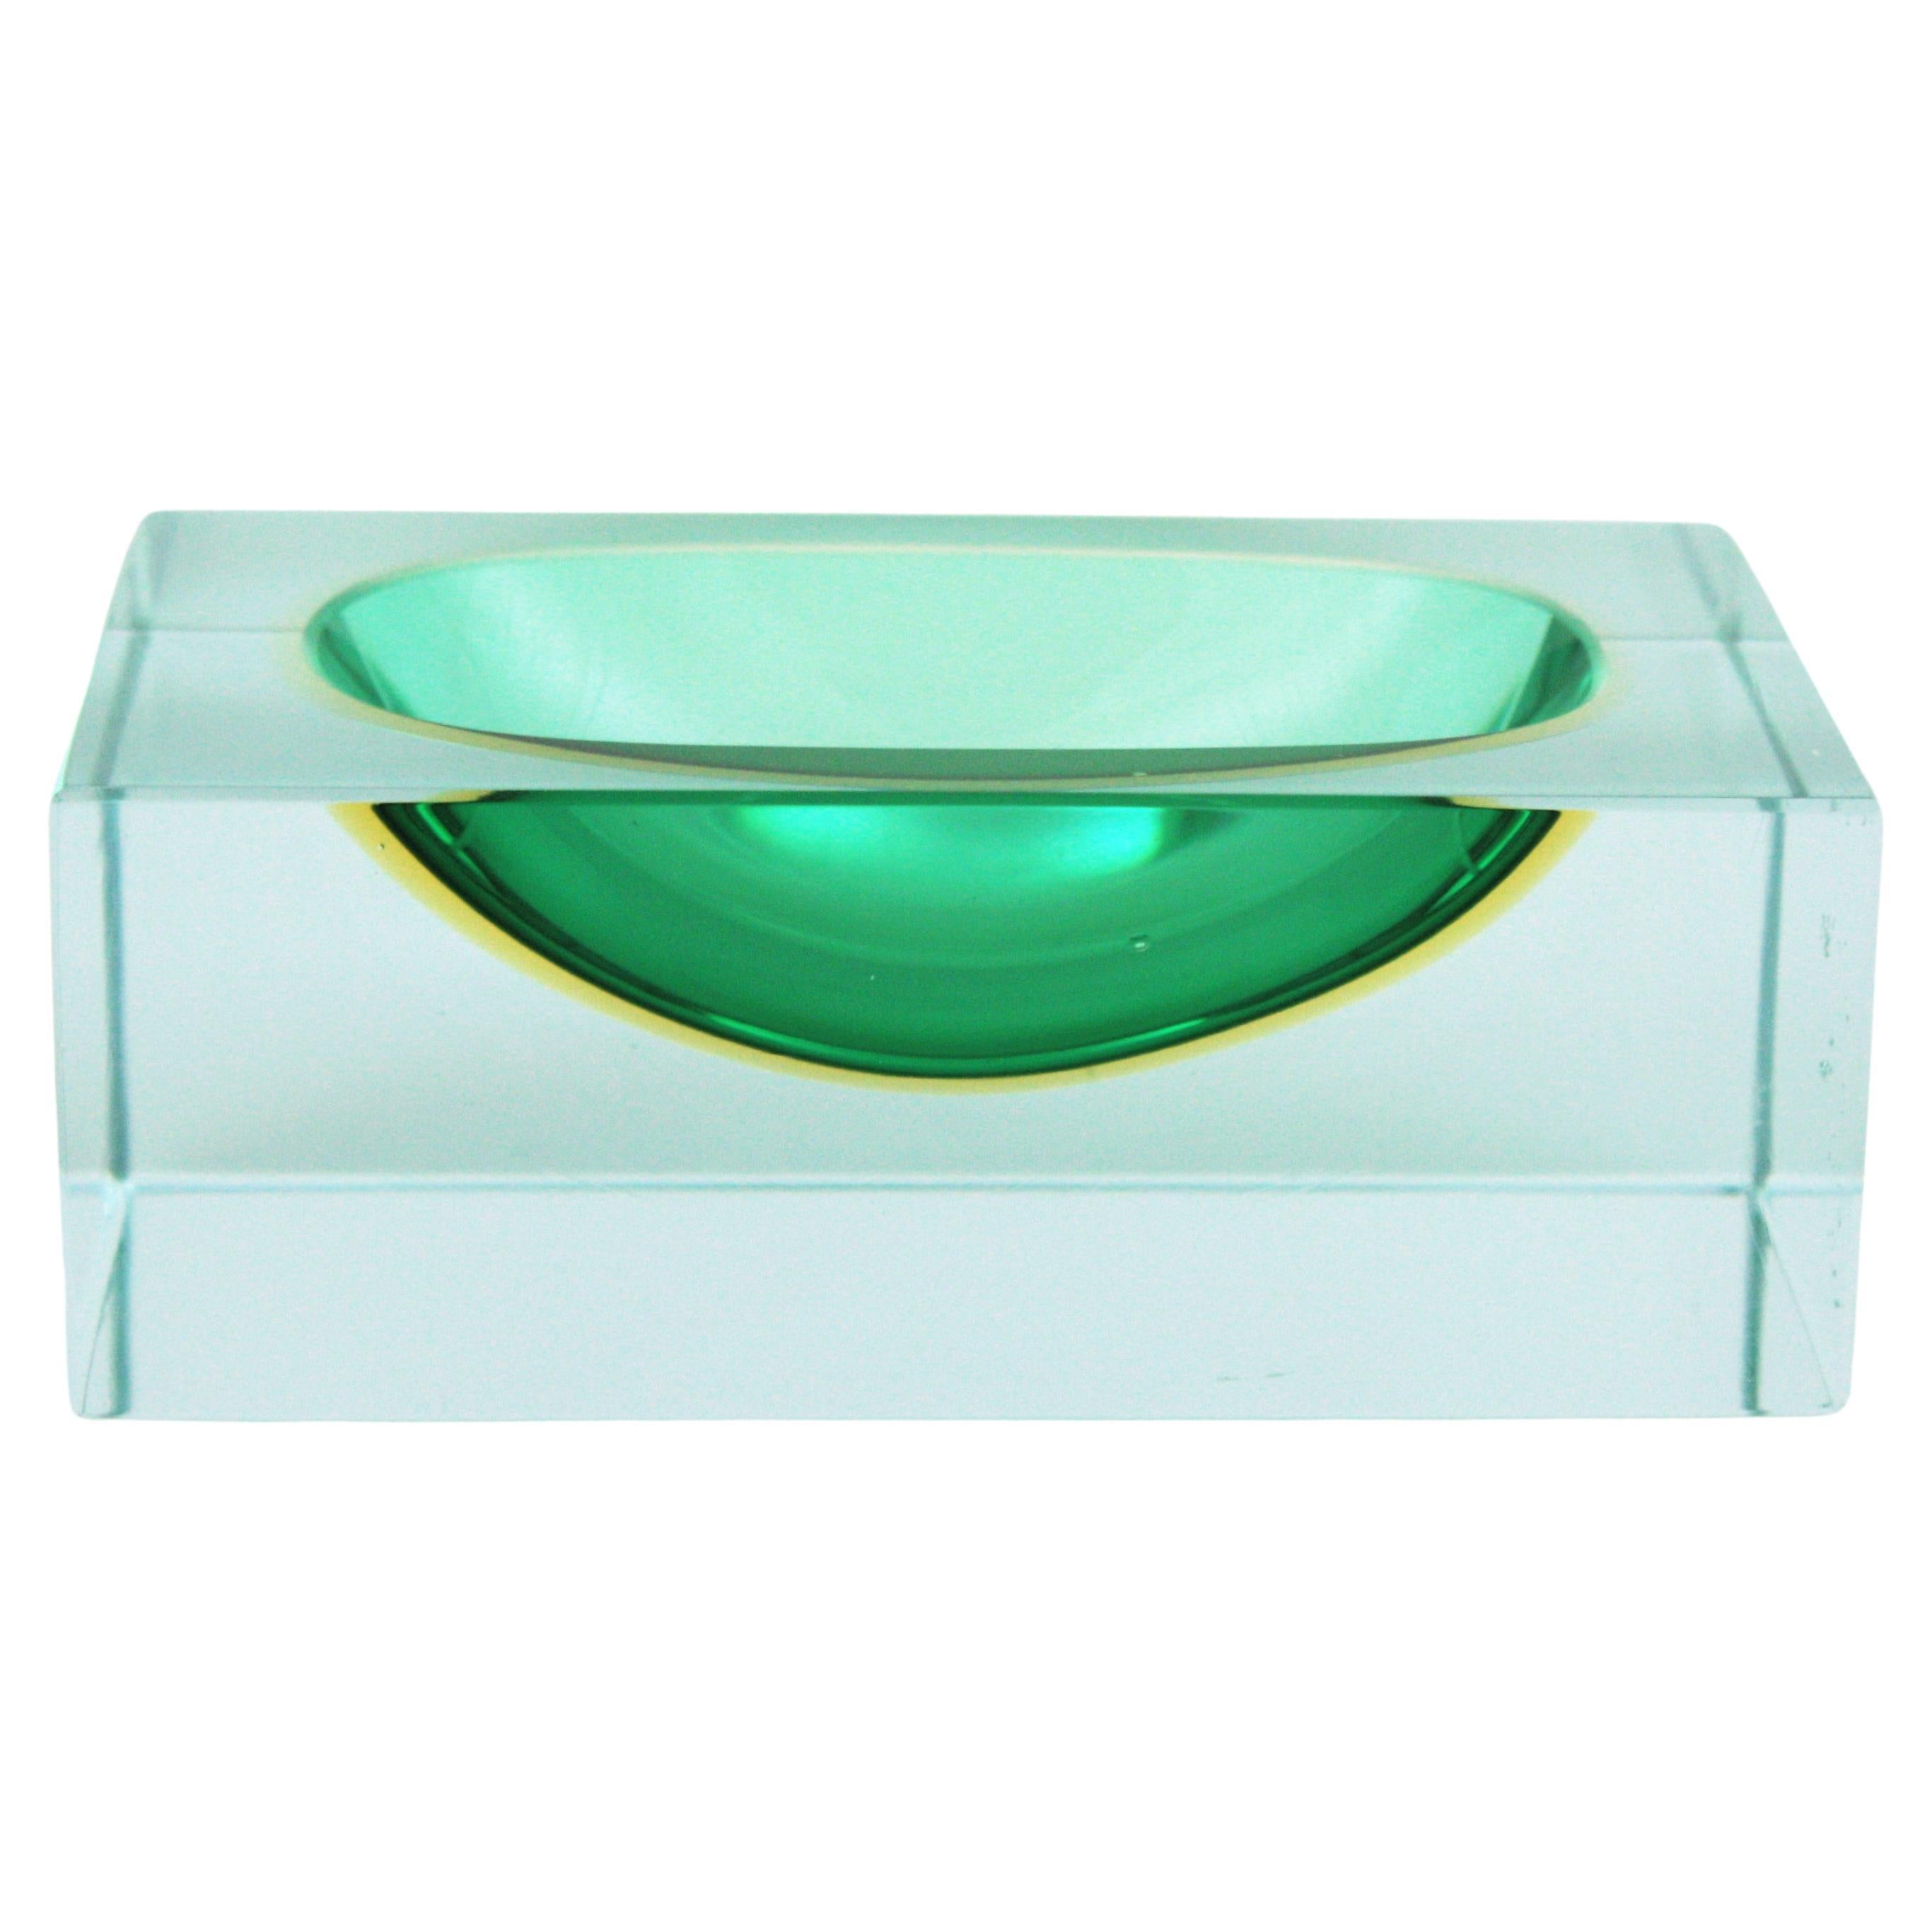 Faceted Sommersorectangular murano art glass block bowl. Attributed to Flavio Poli, Italy, 1950s.
Materials: Murano glass, Faceted.
Colors: dark green, yellow, clear glass
Eye-catching rectangular block cut faceted bowl, ashtray or vide-poche in